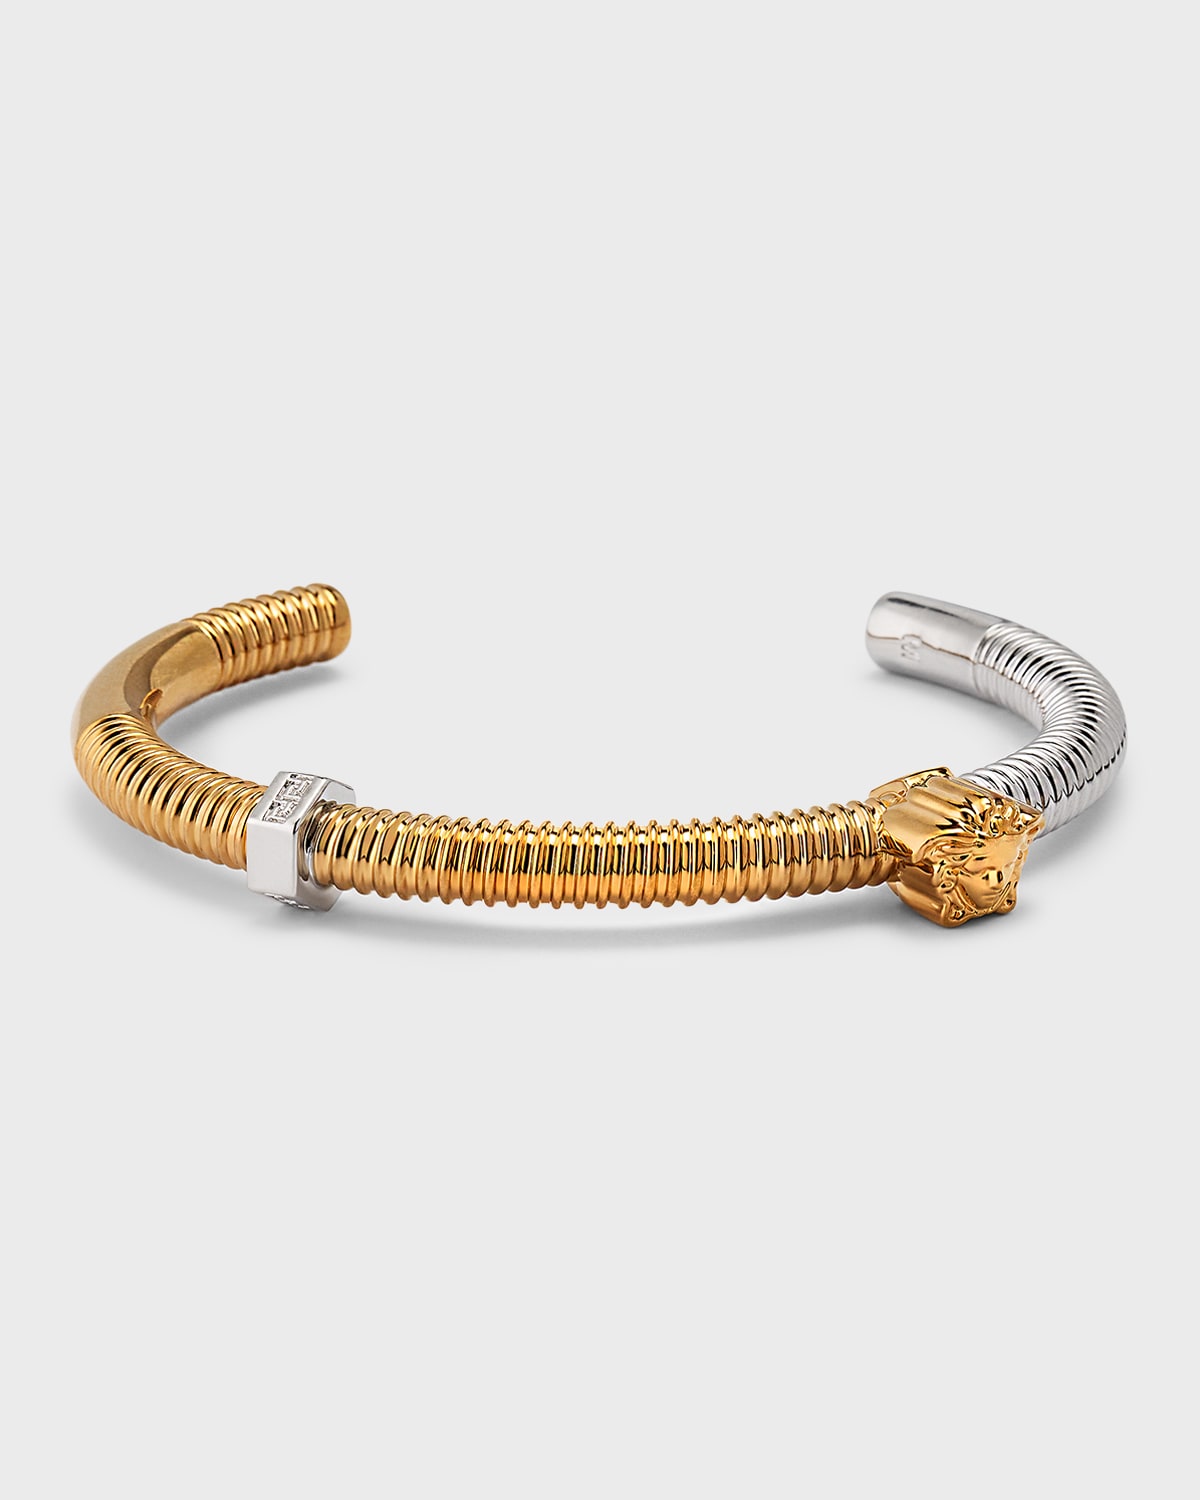 VERSACE MEN'S NUTS AND BOLTS TWO-TONE CUFF BRACELET